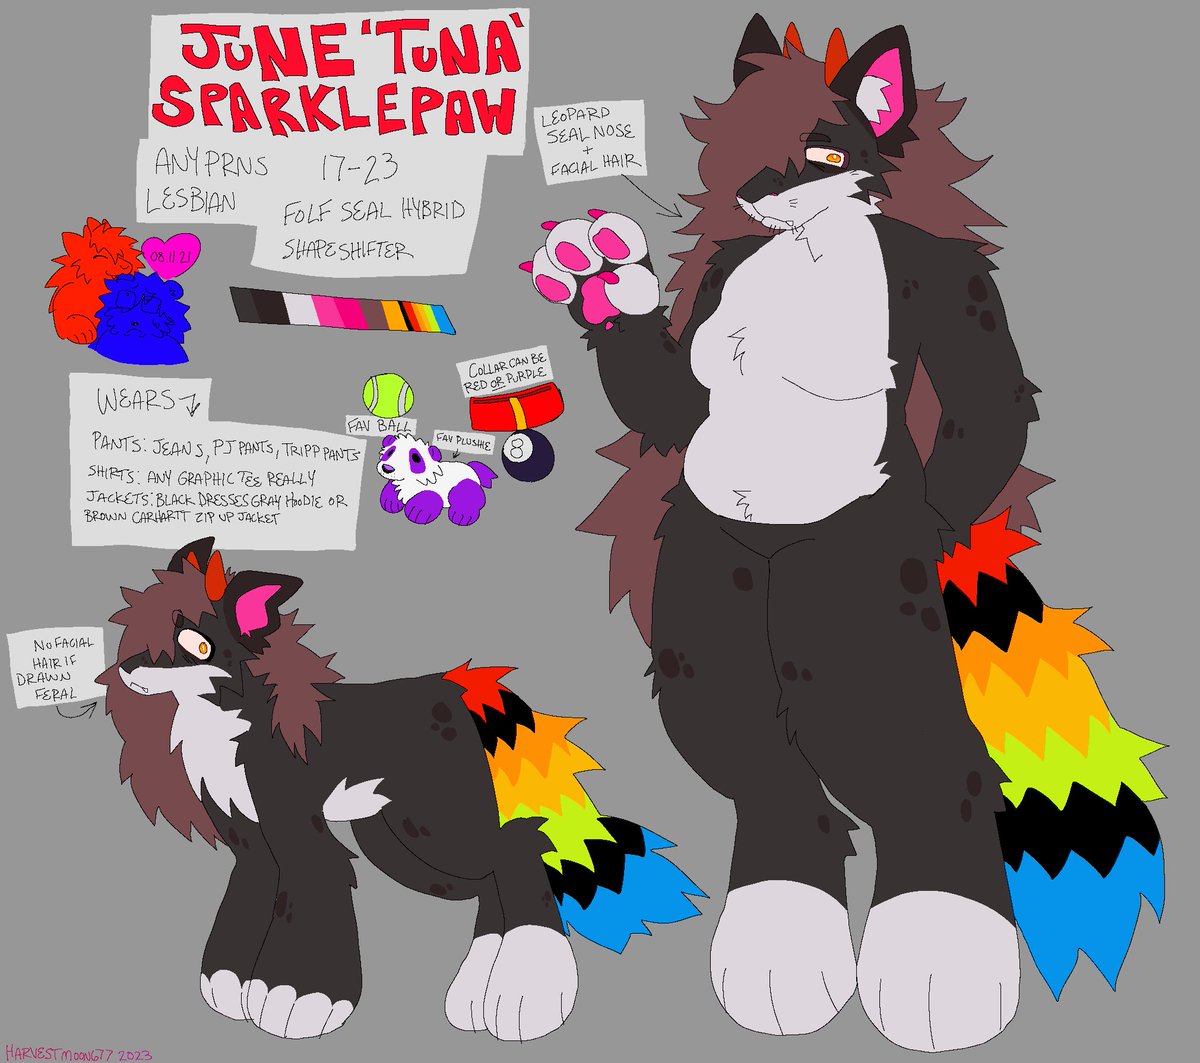 new ref for sona cuz i didnt like the old one